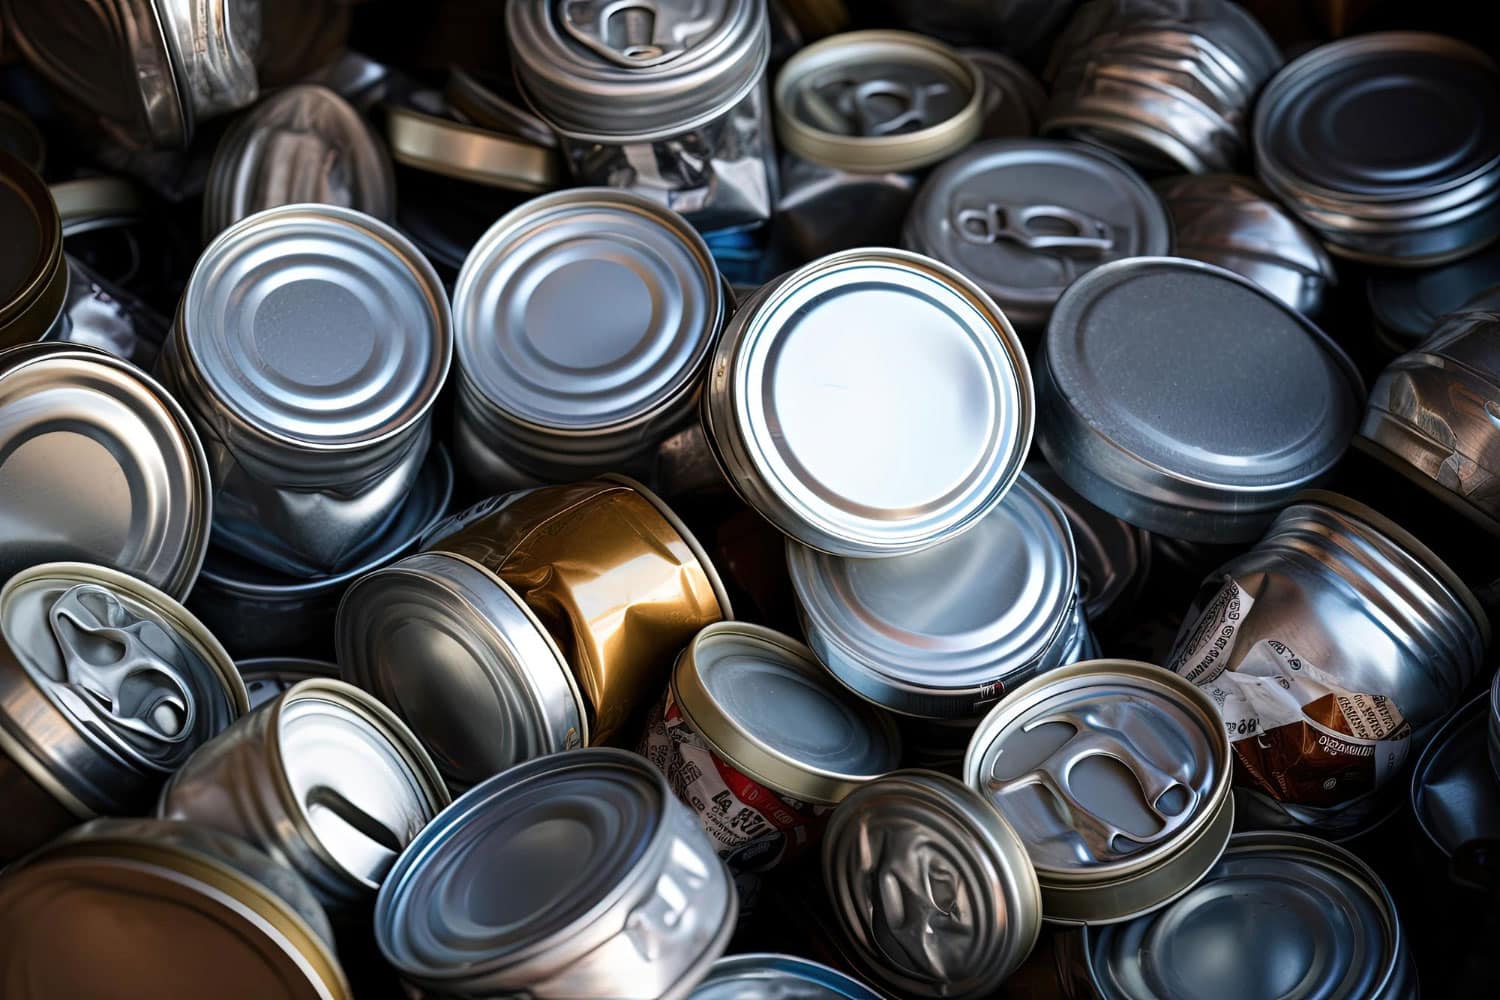 Cornell-led project aims to reduce carbon emissions in aluminum recycling